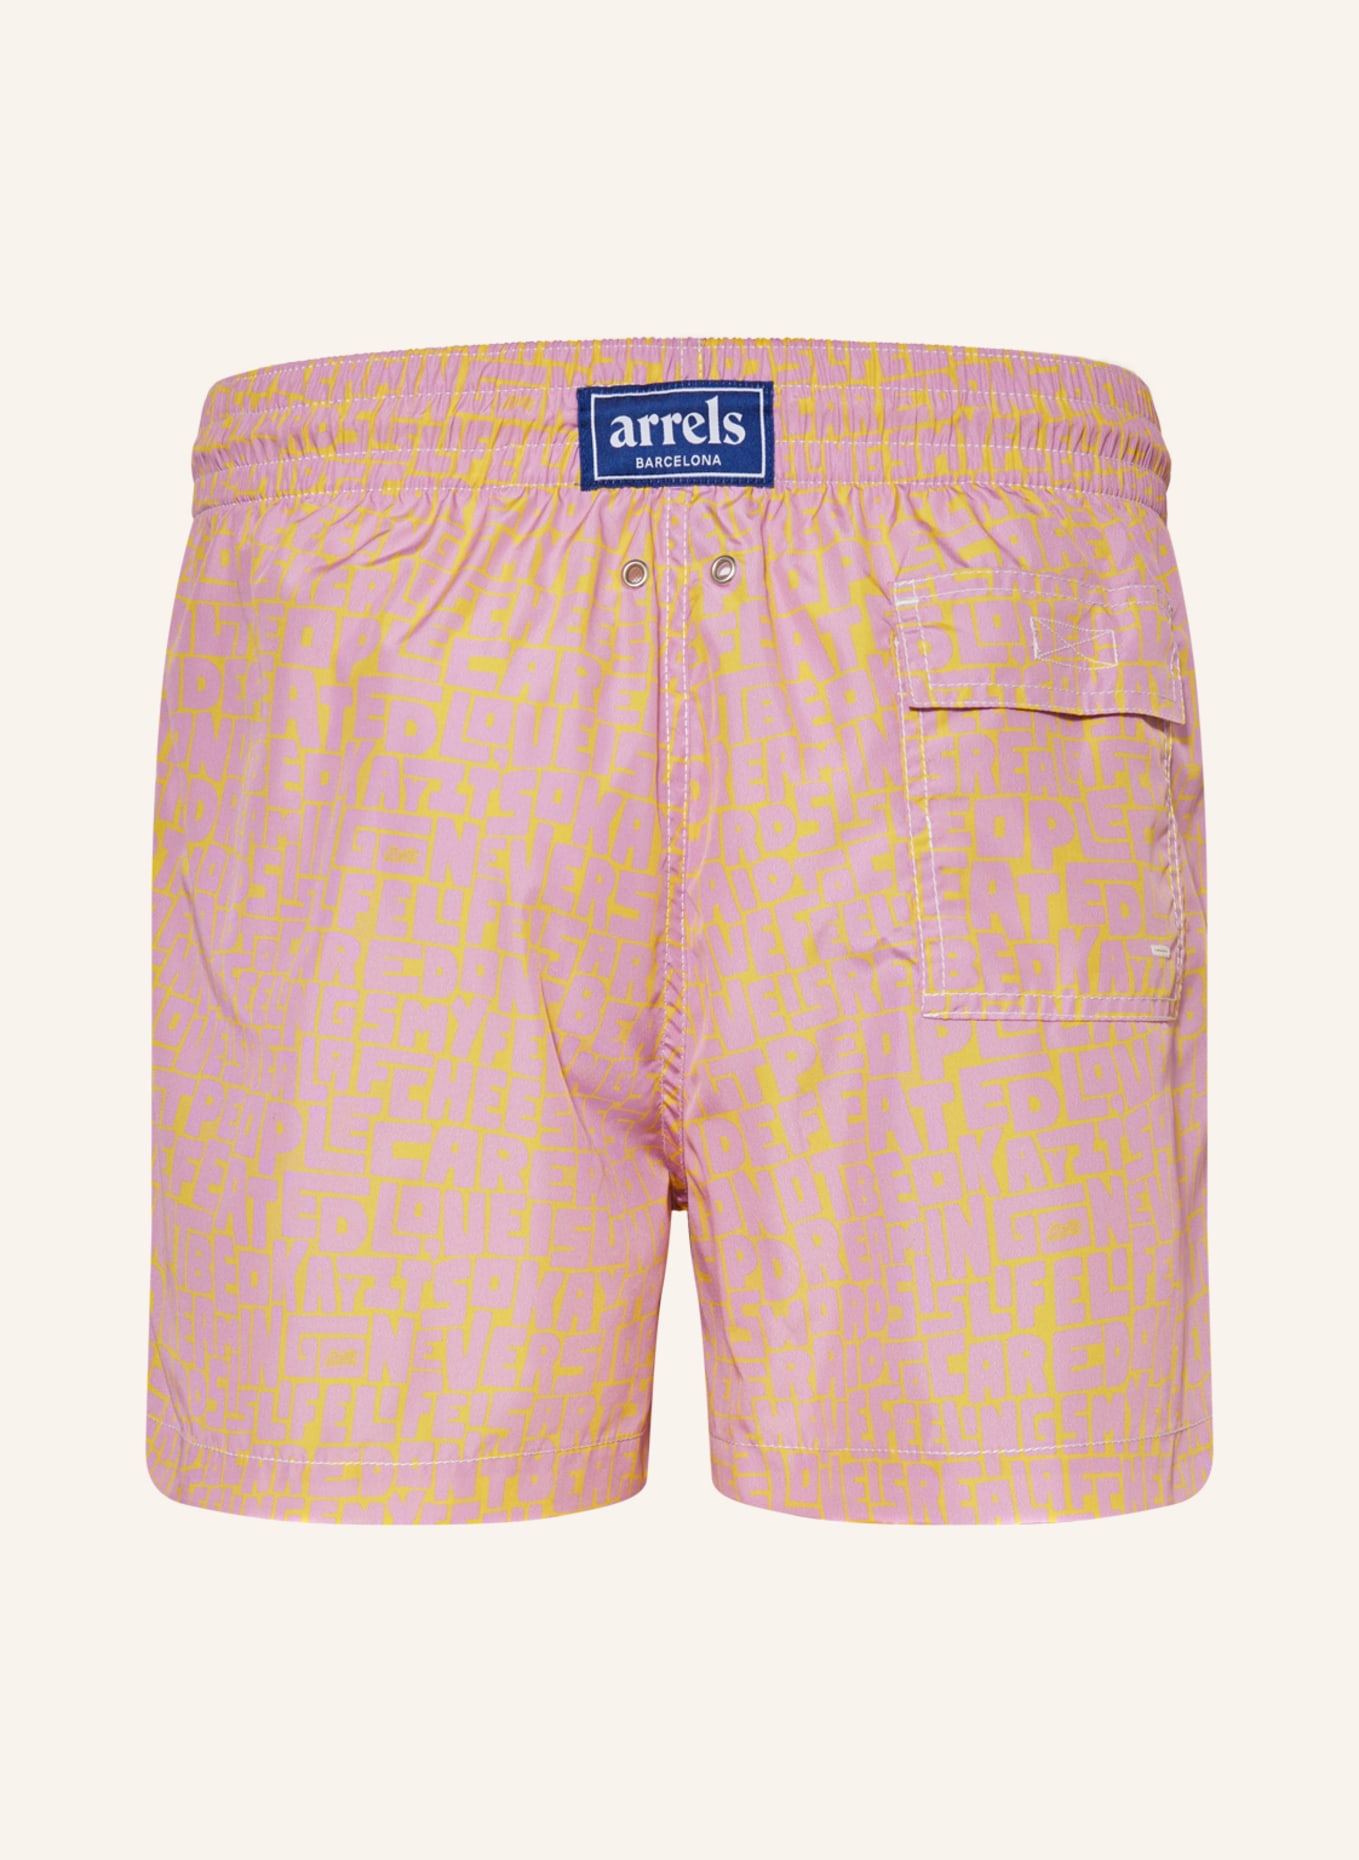 arrels BARCELONA Swim shorts PINK NEVER STOP DREAMING × TIMOTHY GOOD, Color: PINK/ YELLOW (Image 2)